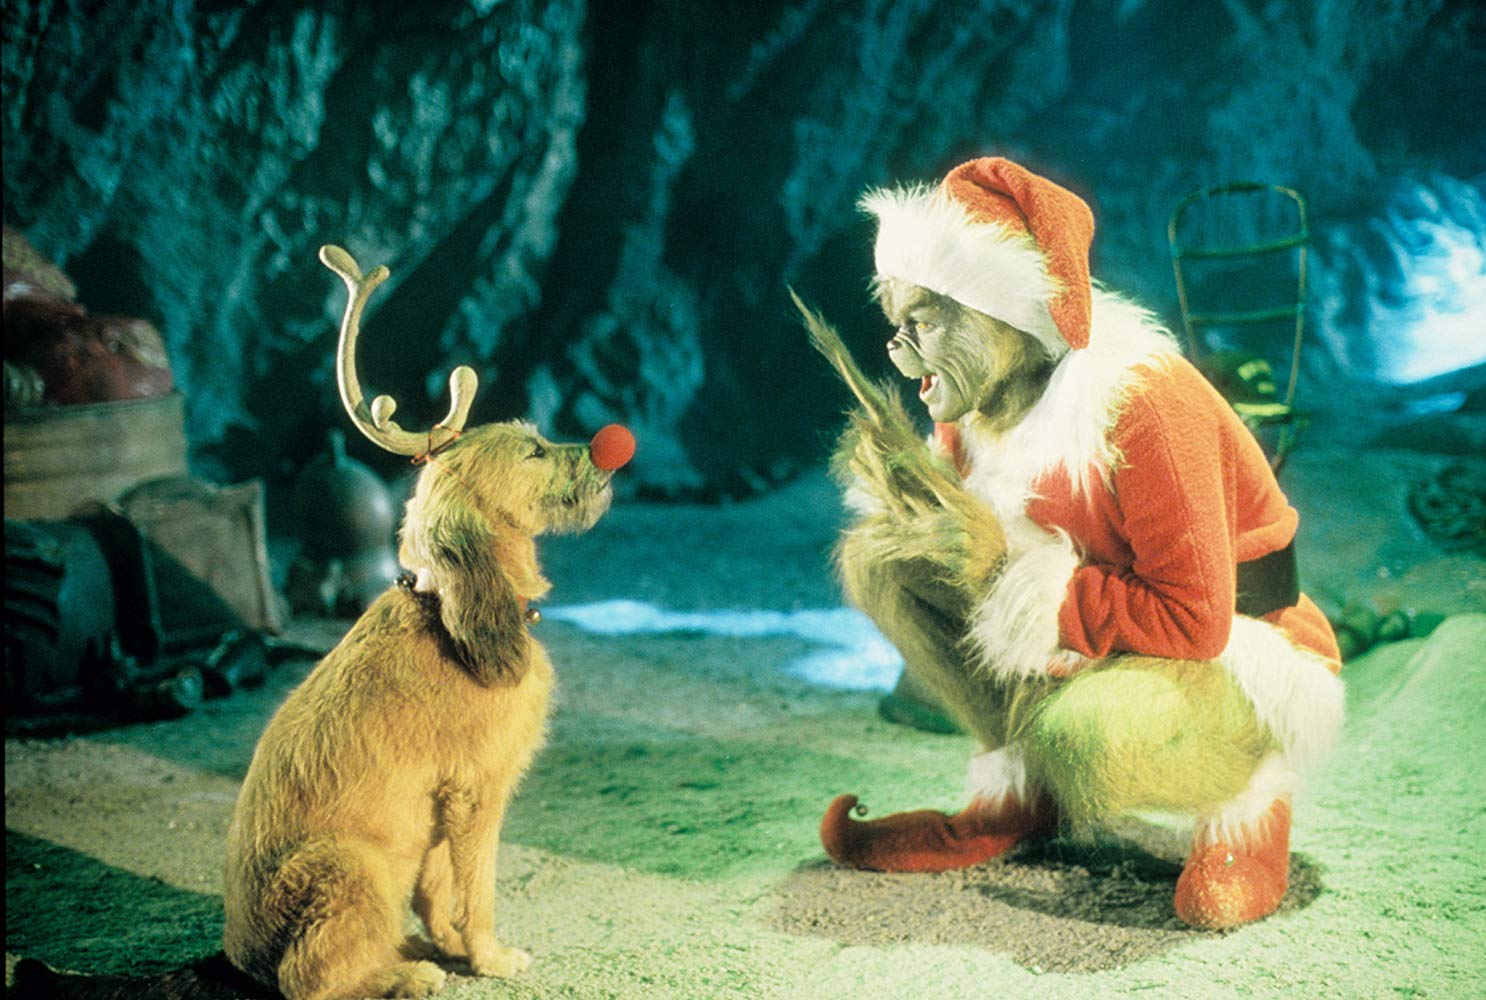 10. 8 Hours - Jim Carrey as the Grinch